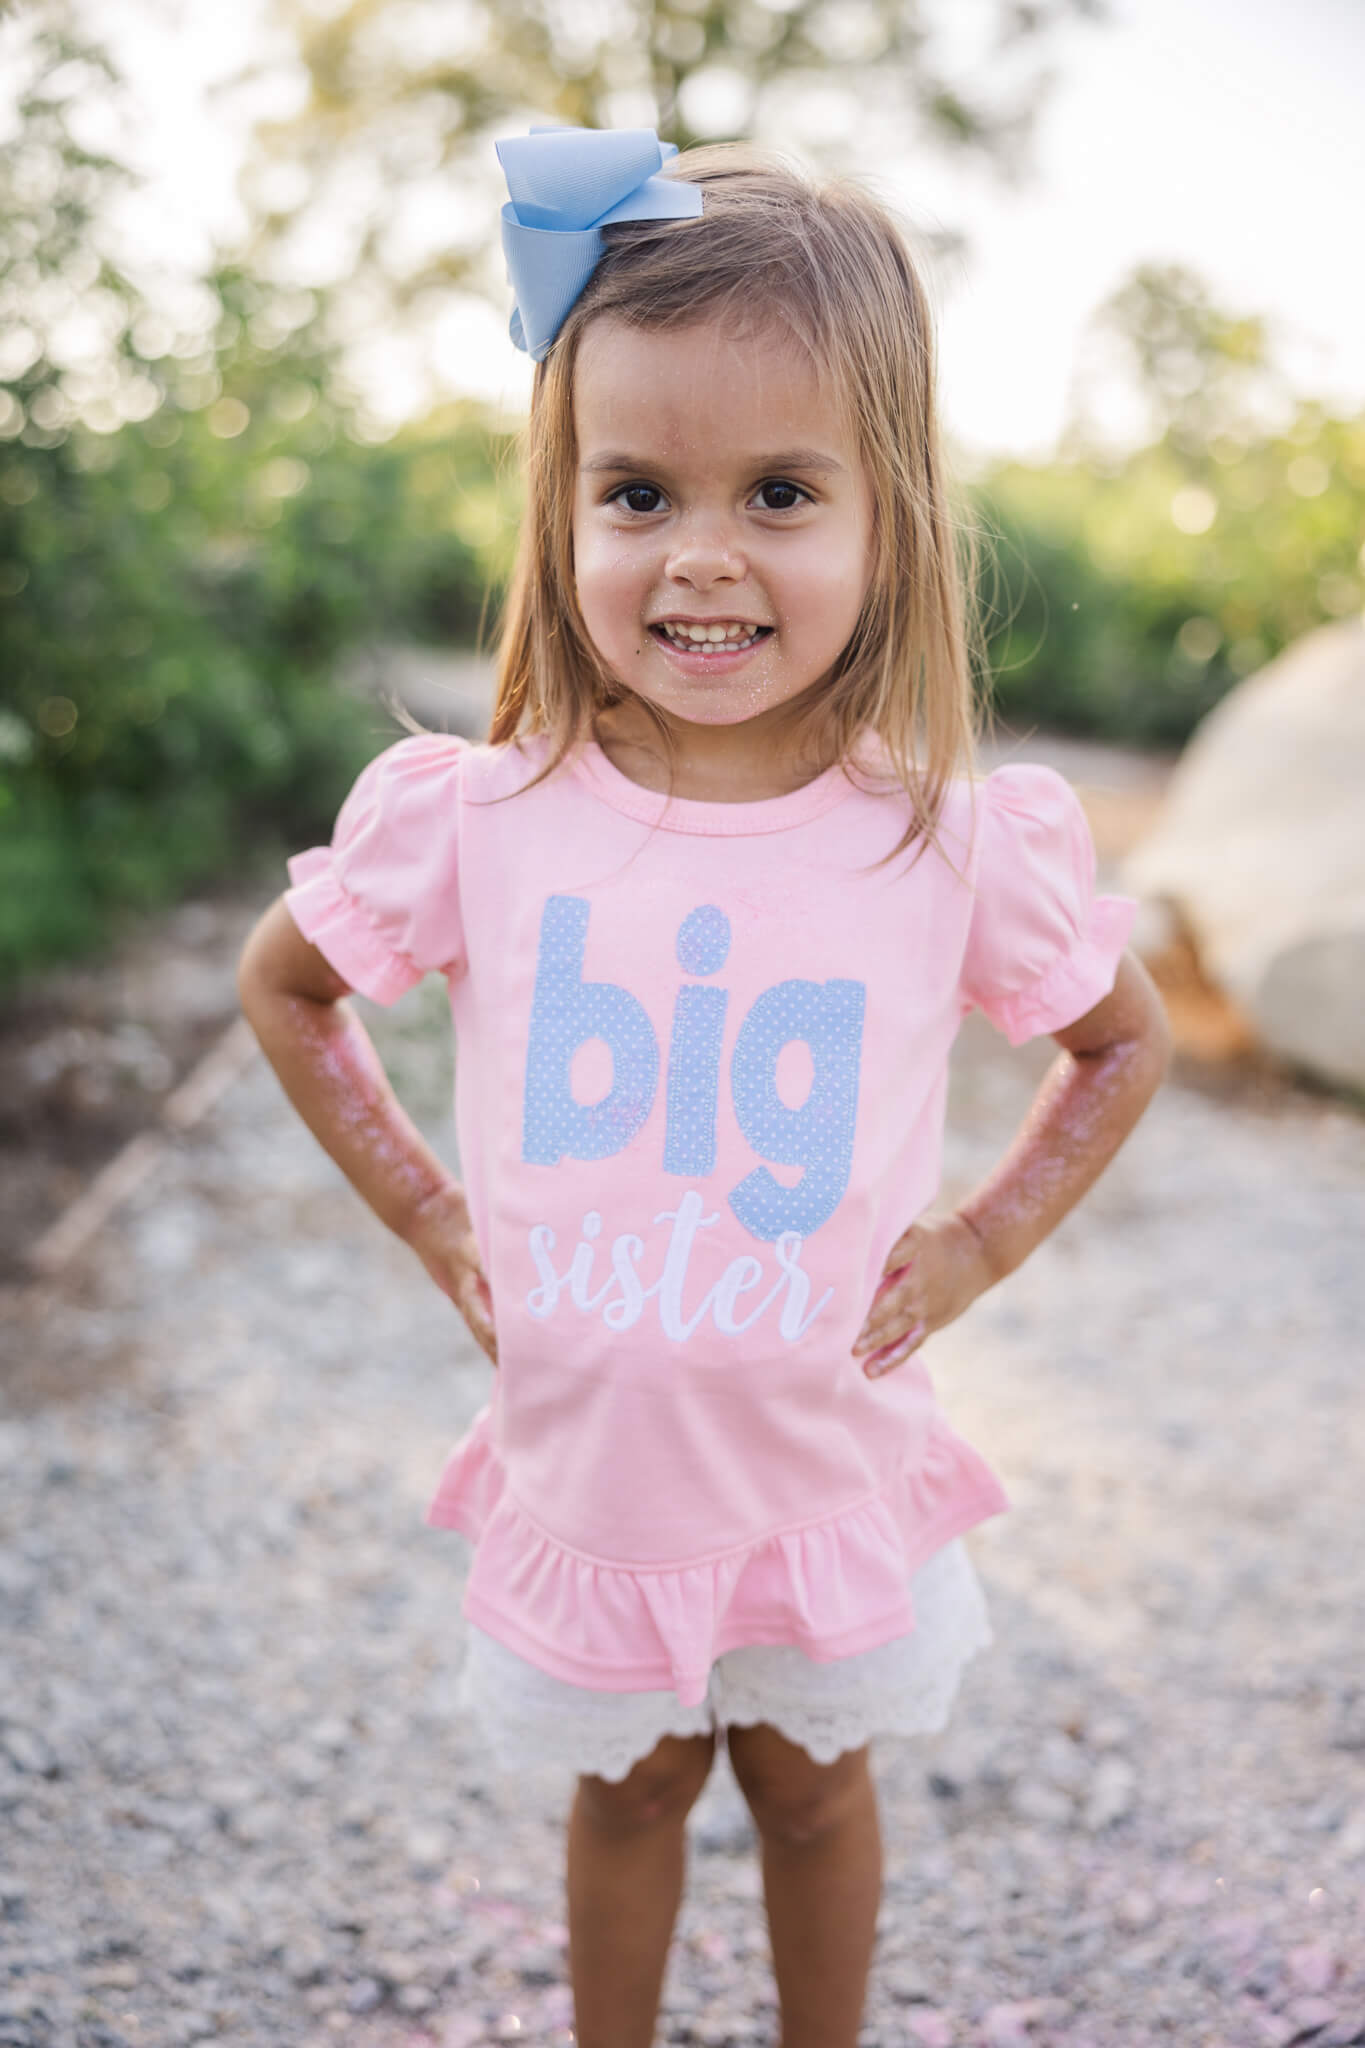 4 year old announcing that she is being promoted to big sister during recent family photography session by molly berry photography.